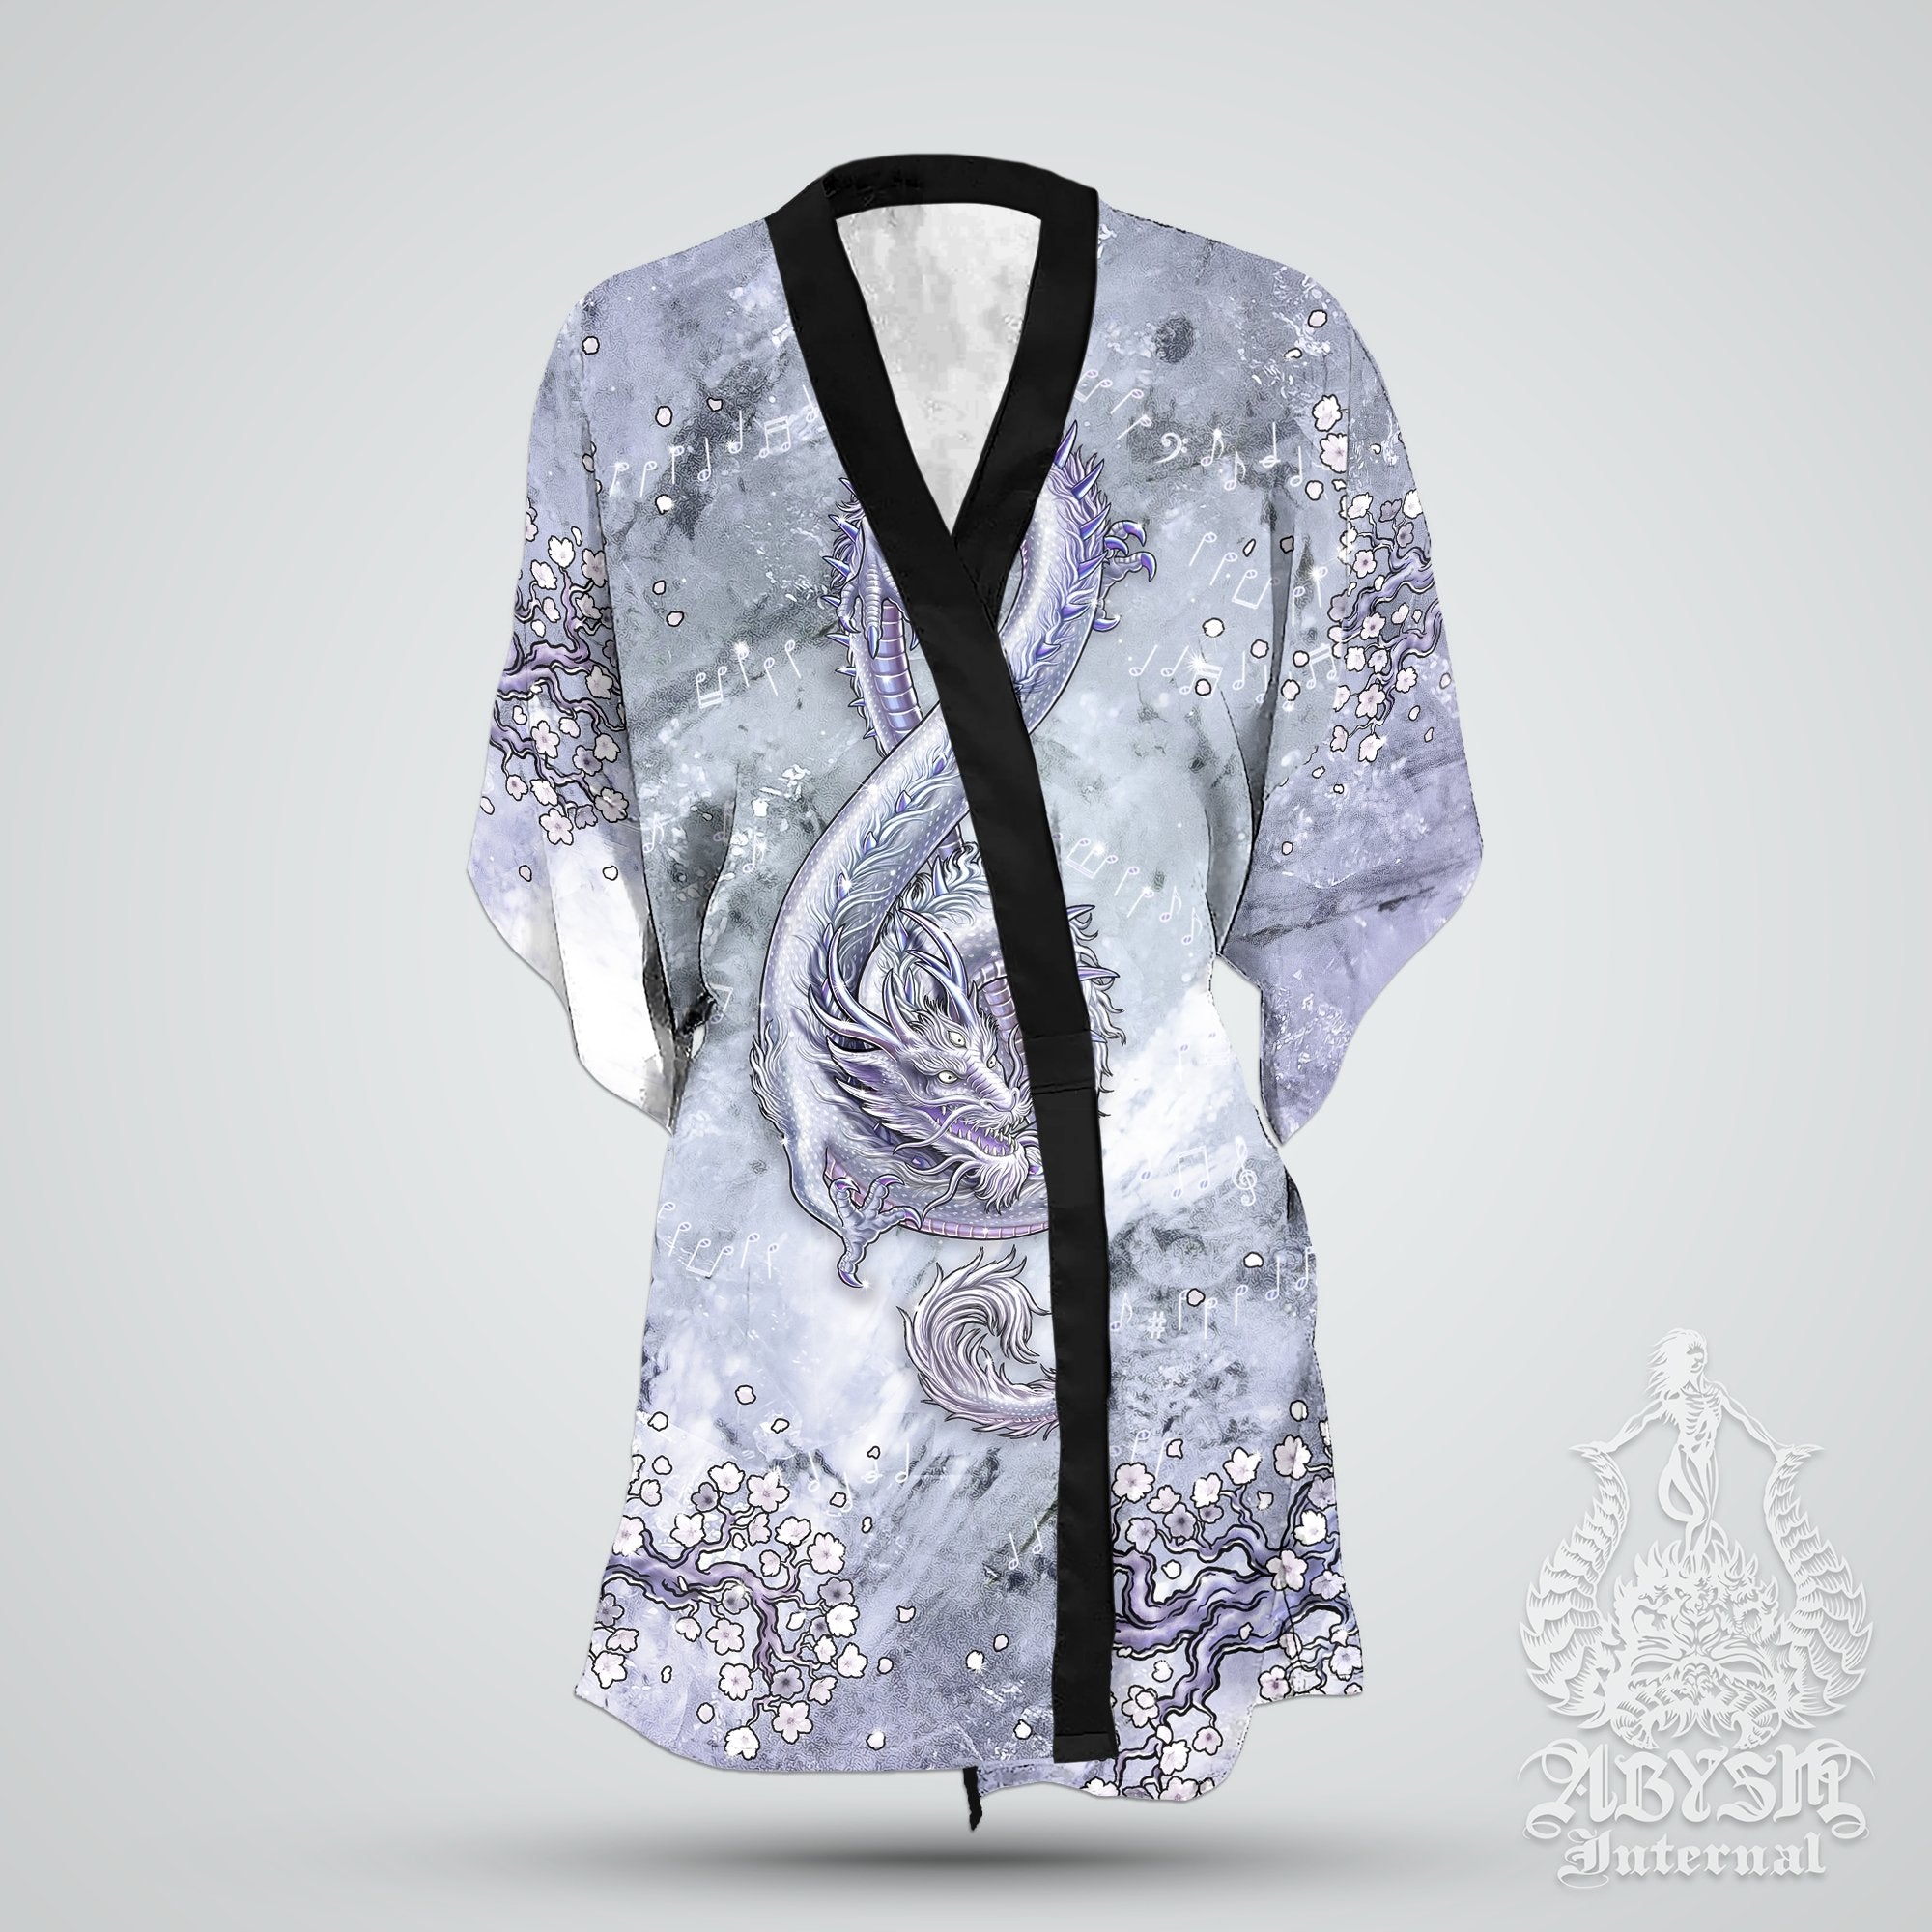 Music Cover Up, Beach Outfit, Party Kimono, Summer Festival Robe, Boho Indie and Alternative Clothing, Unisex - Dragon, Crystal Diamond - Abysm Internal